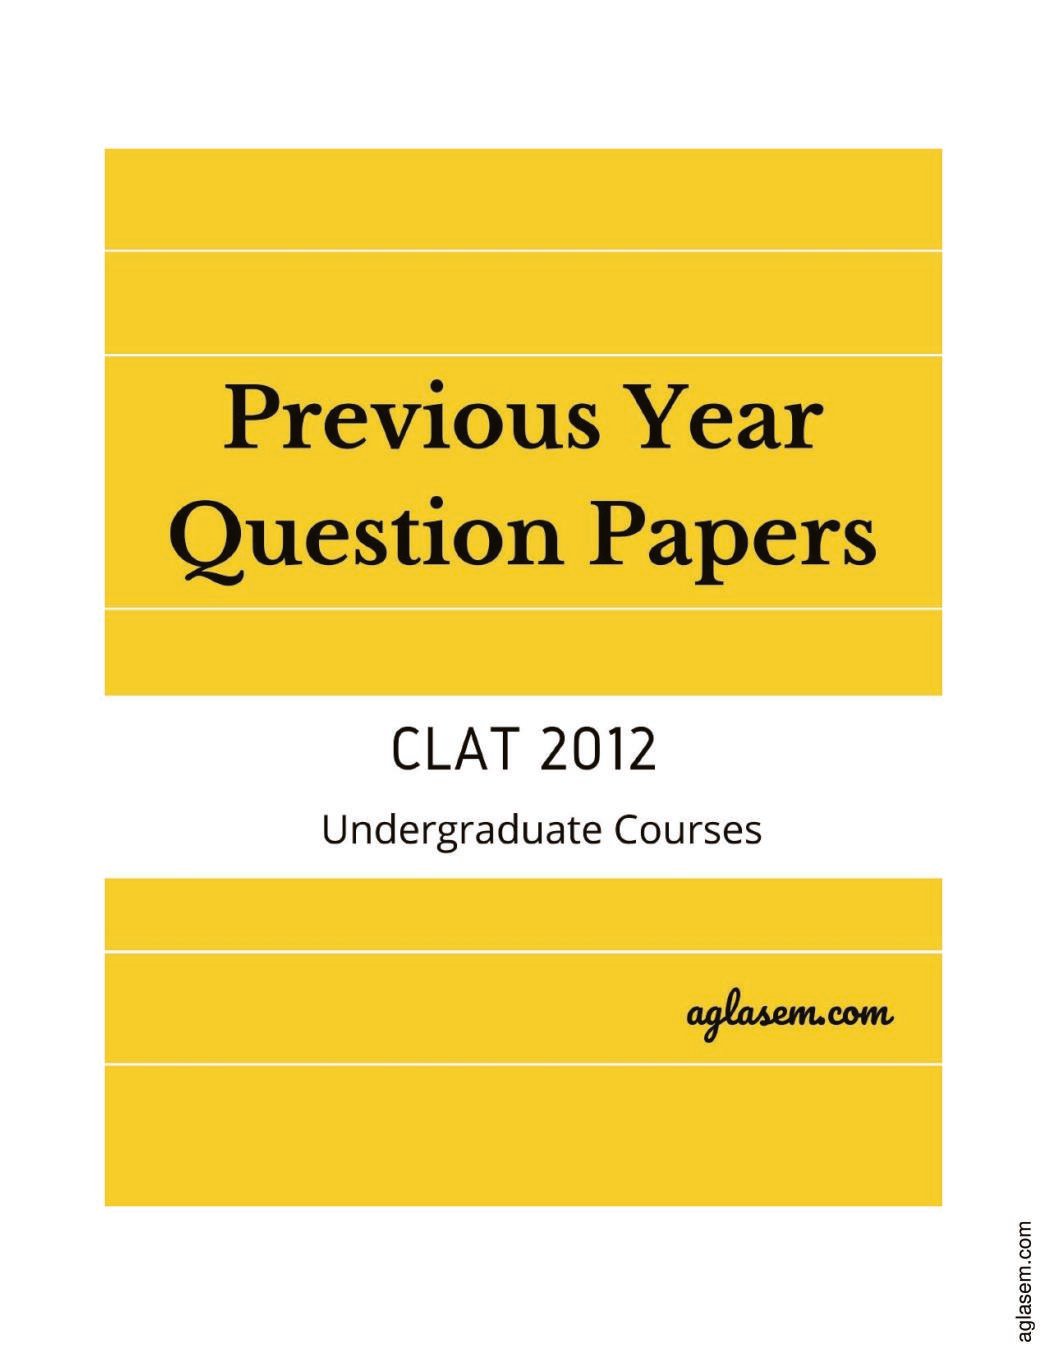 CLAT 2012 Question Paper - Page 1